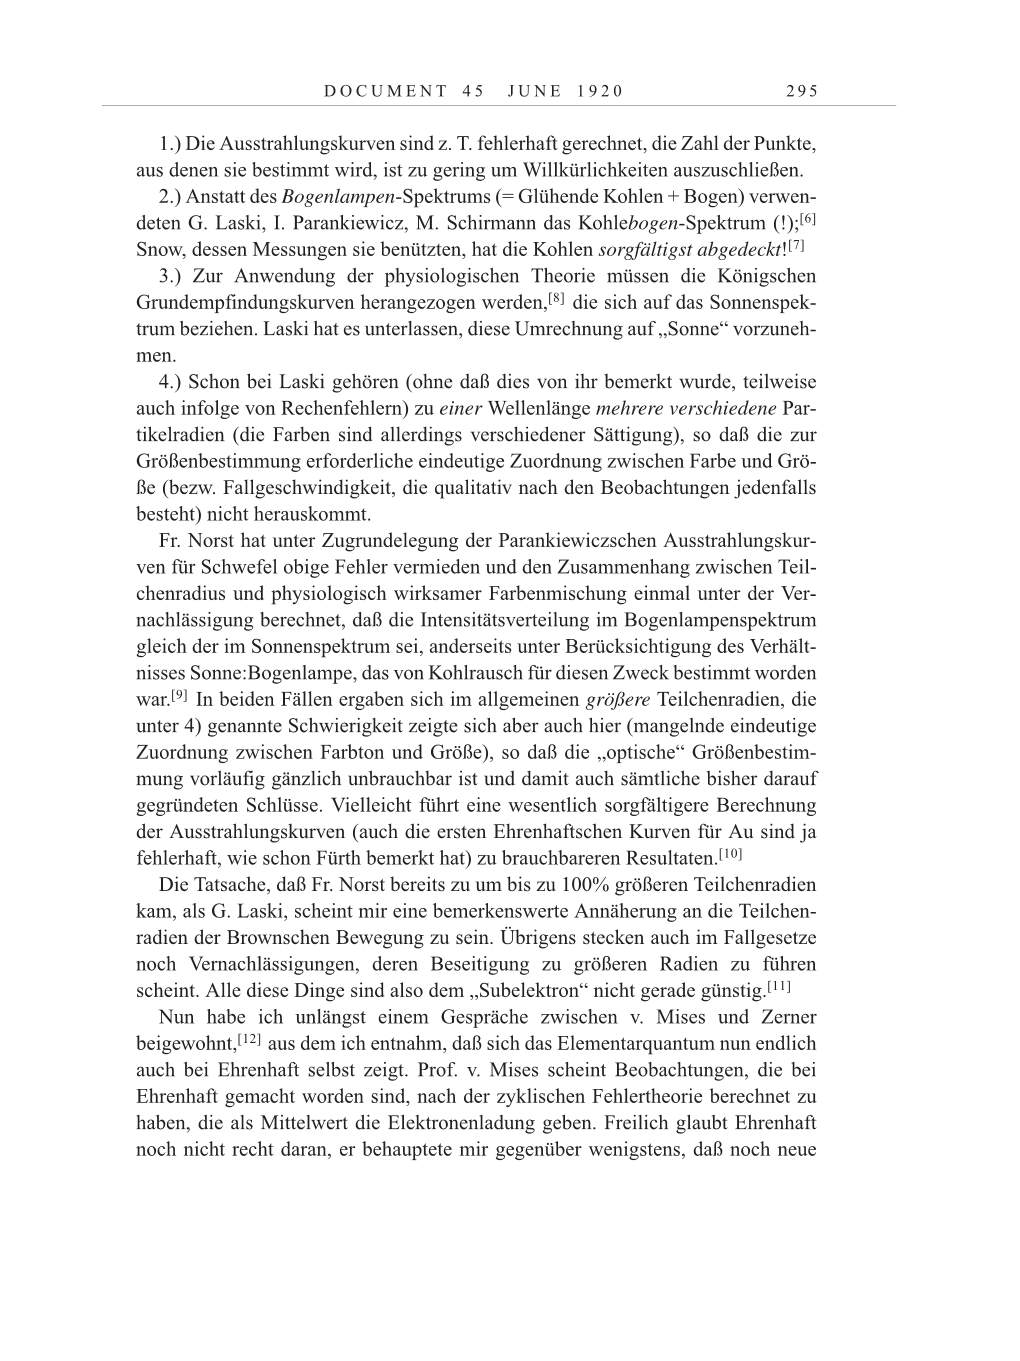 Volume 10: The Berlin Years: Correspondence May-December 1920 / Supplementary Correspondence 1909-1920 page 295